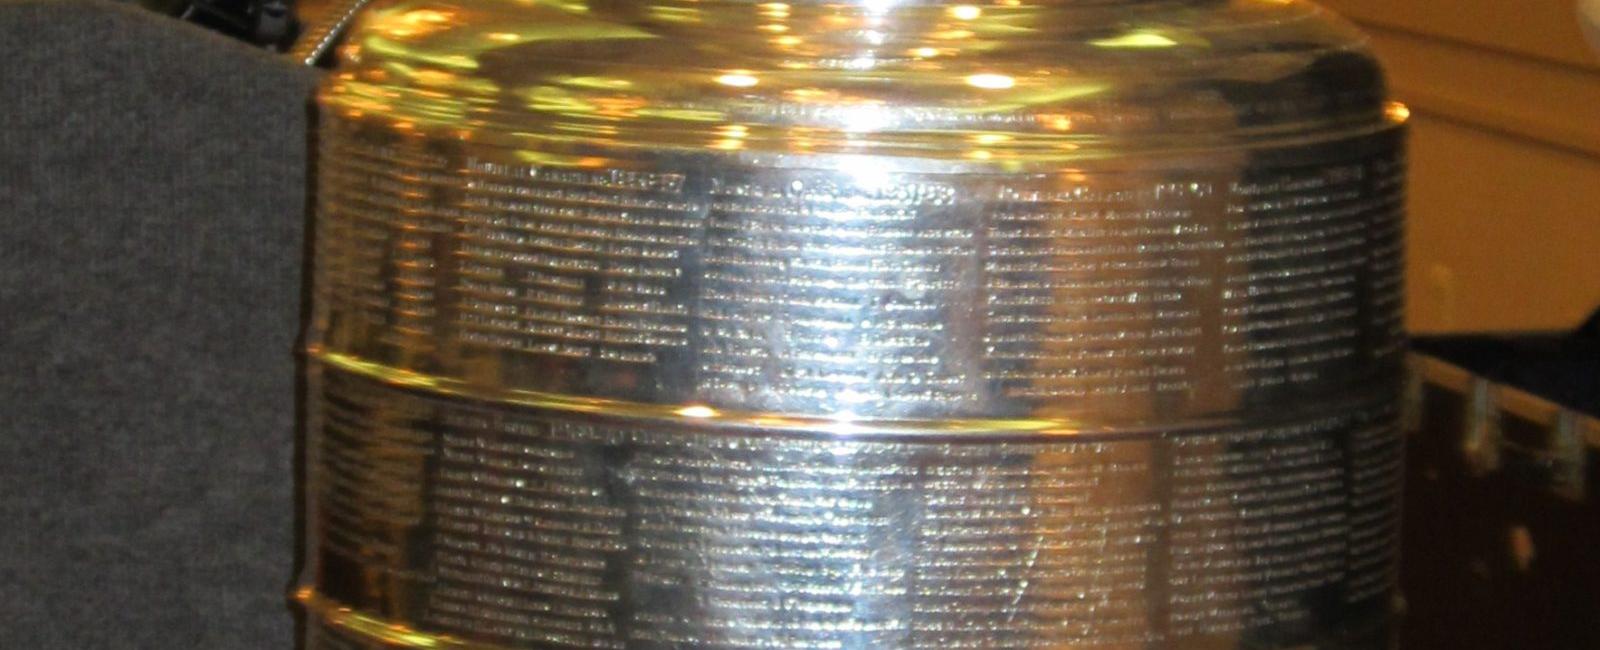 The original stanley cup was only seven and a half inches high